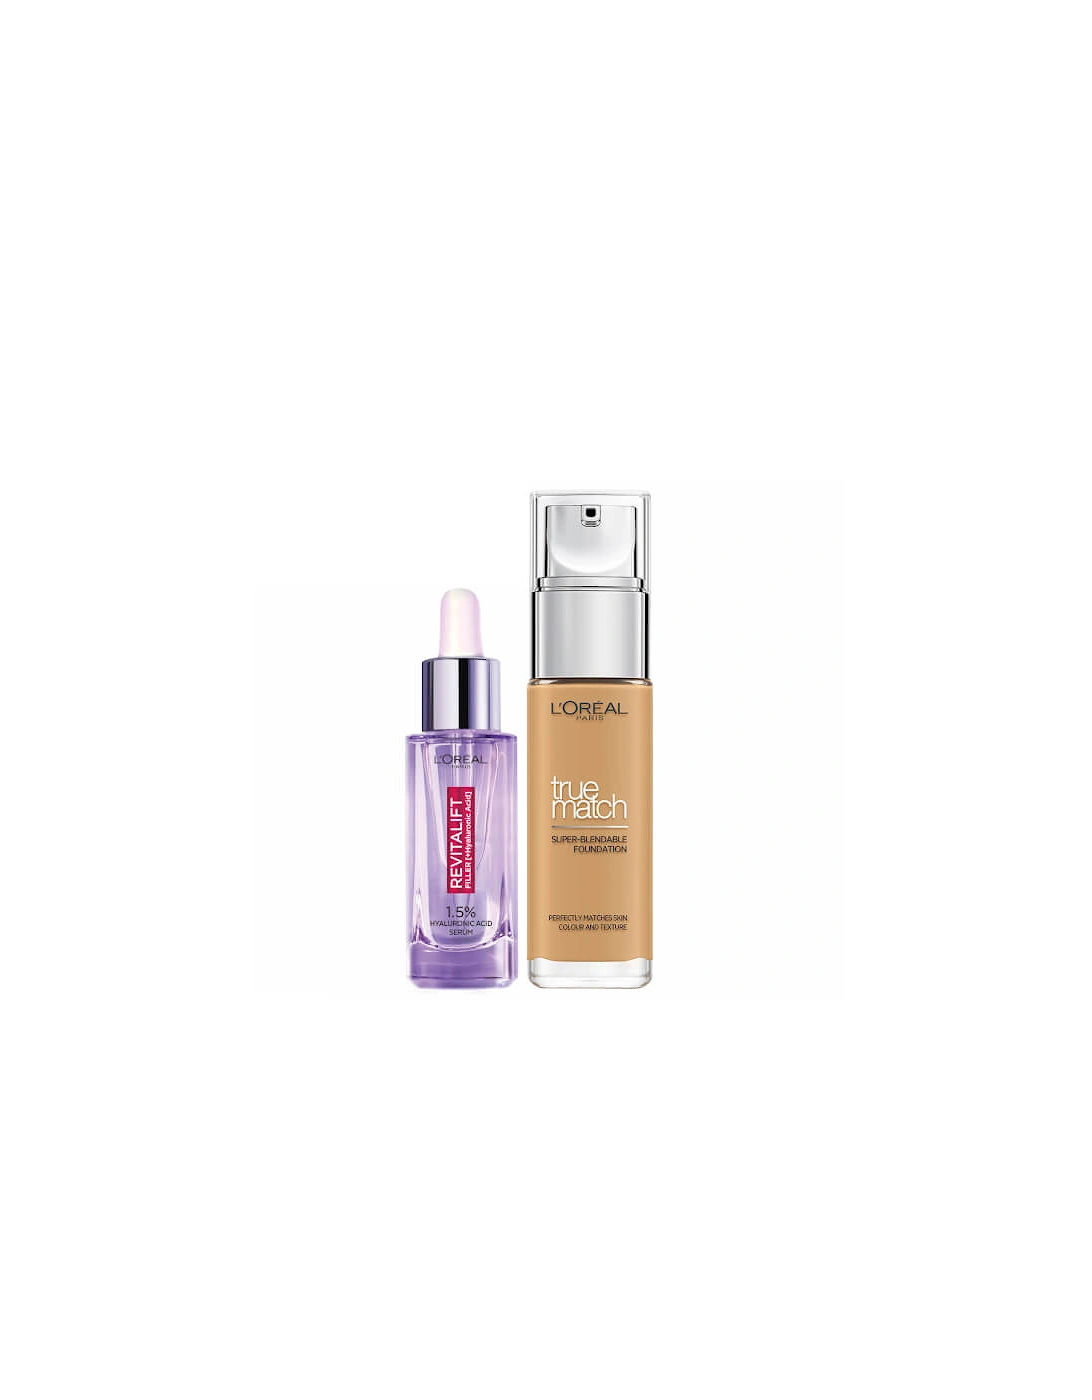 L’Oreal Paris Hyaluronic Acid Filler Serum and True Match Hyaluronic Acid Foundation Duo - 6W Golden Honey, 2 of 1